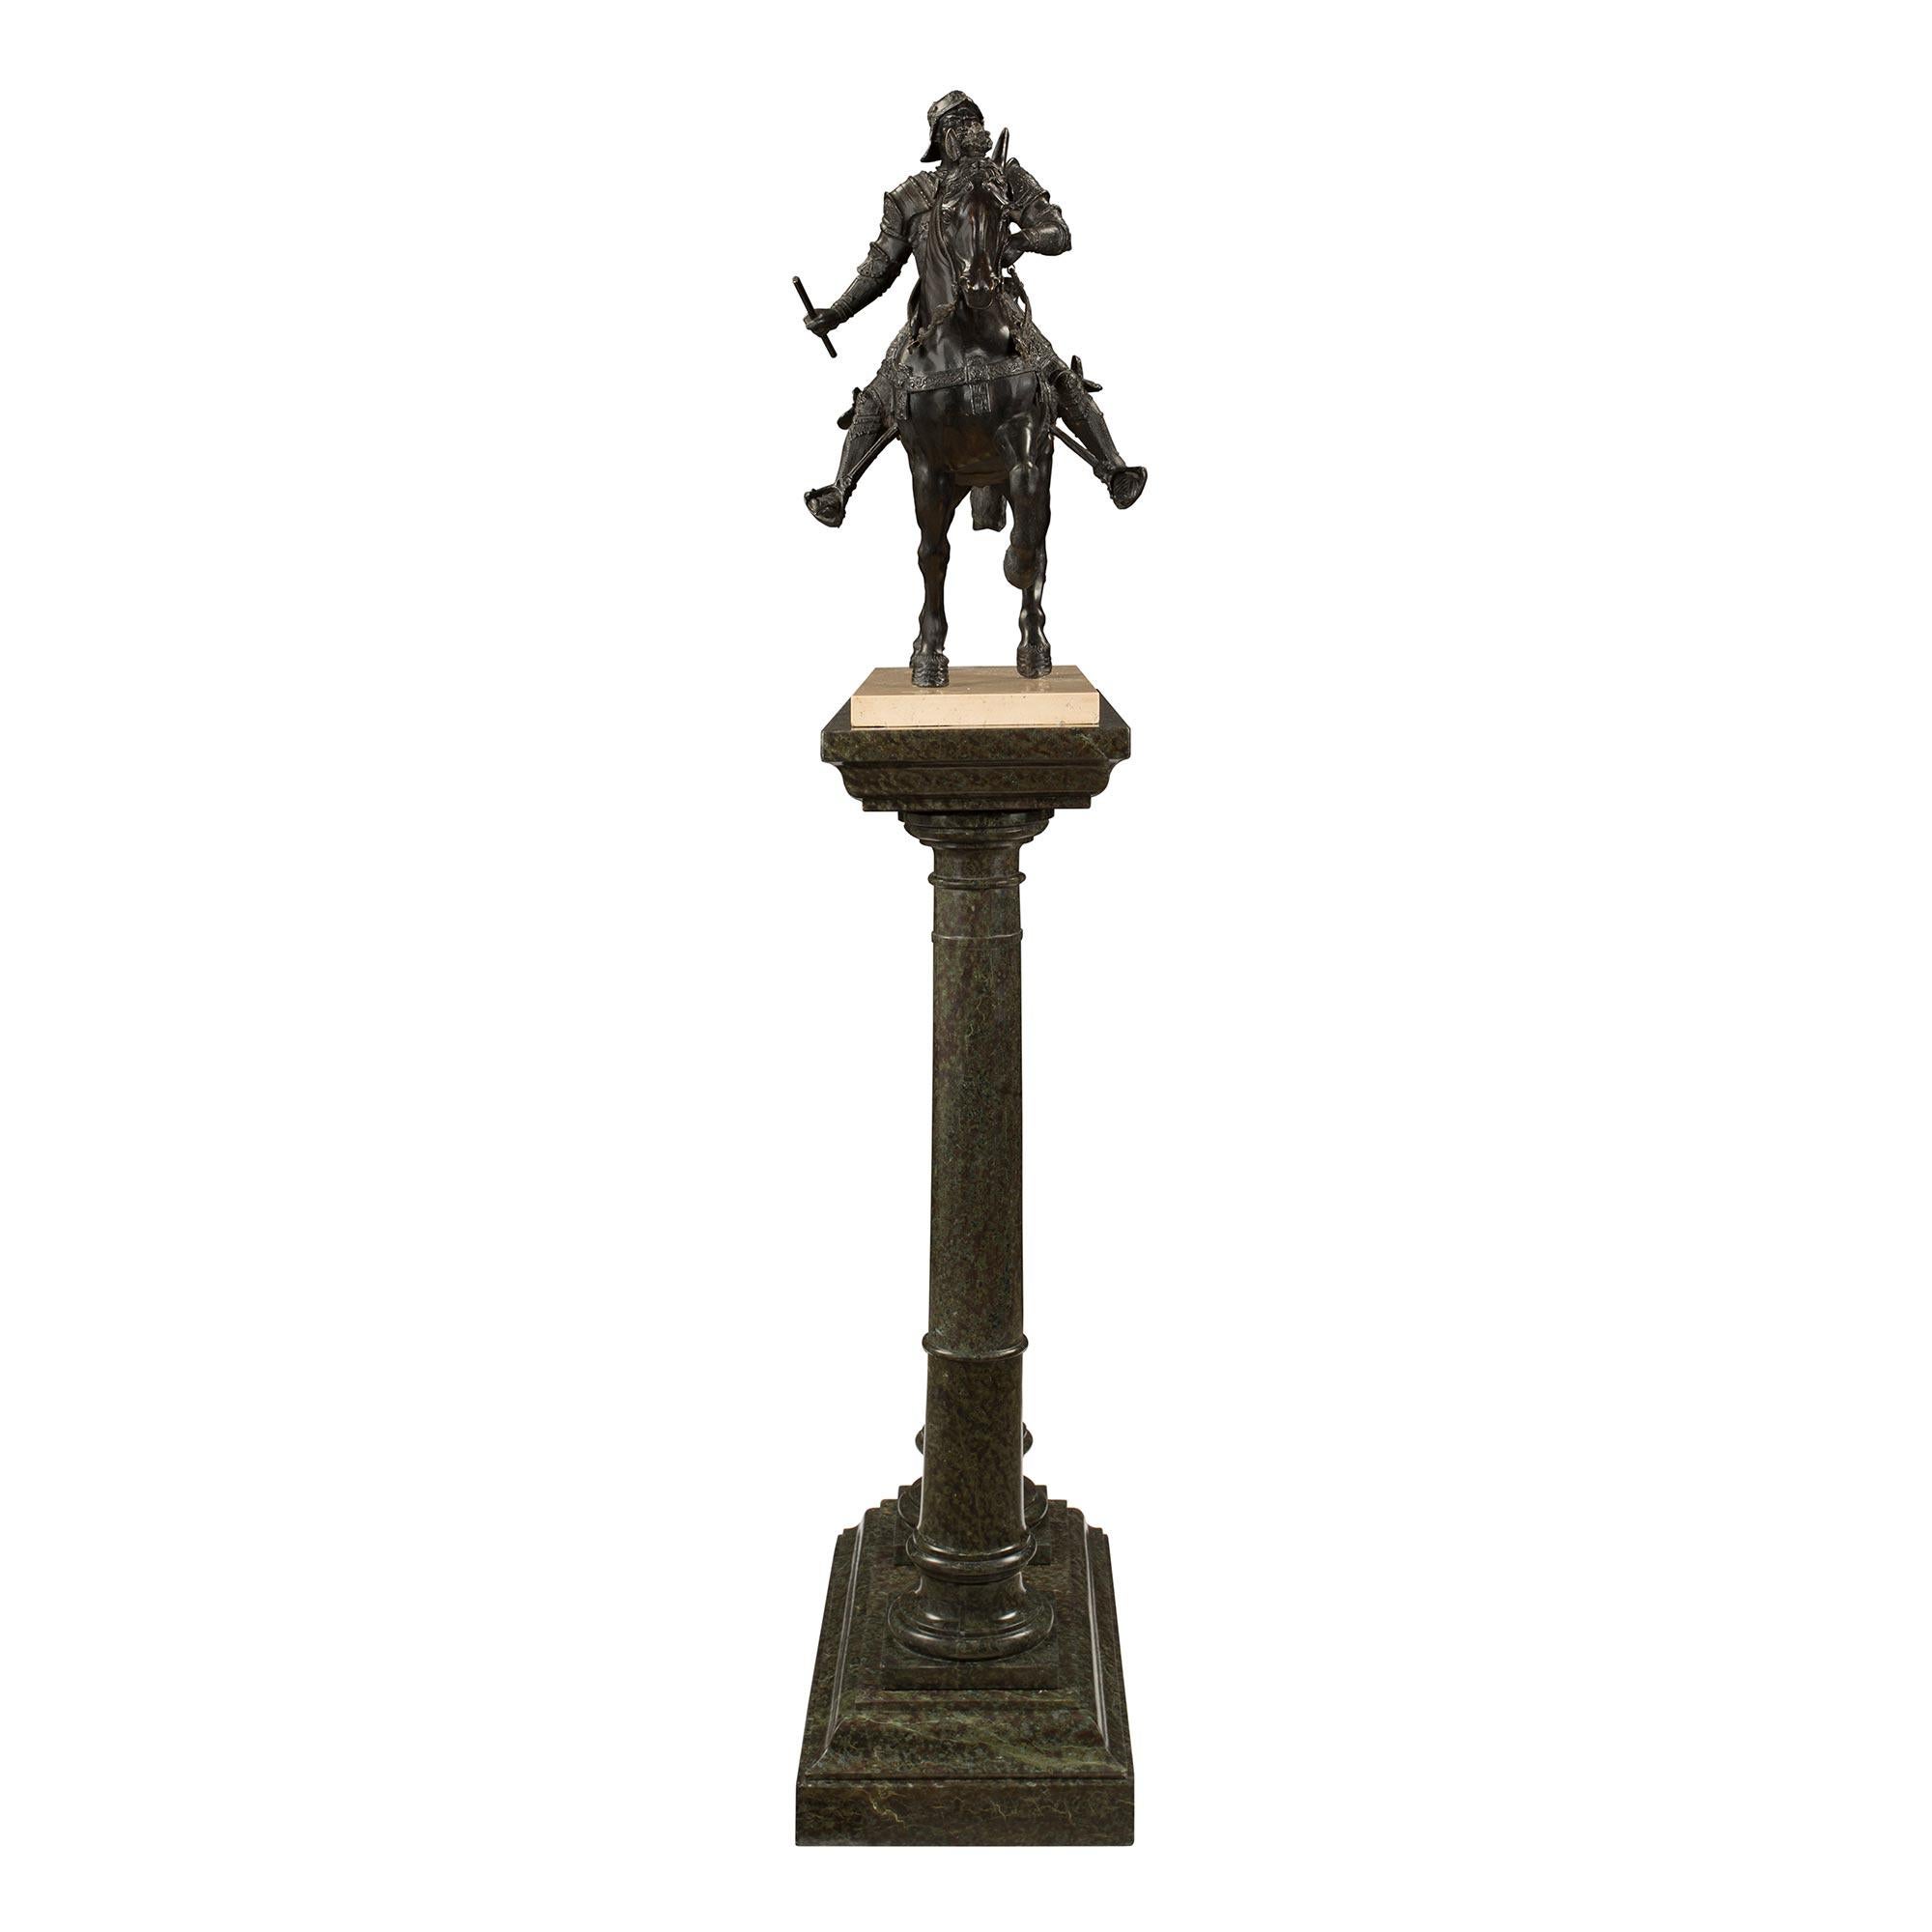 A handsome French 19th century Louis XVI st. patinated bronze soldier on his horse. The statue rests on its original double column marble pedestal. The pedestal is raised by the thick green marble mottled rectangular base below the two turned marble